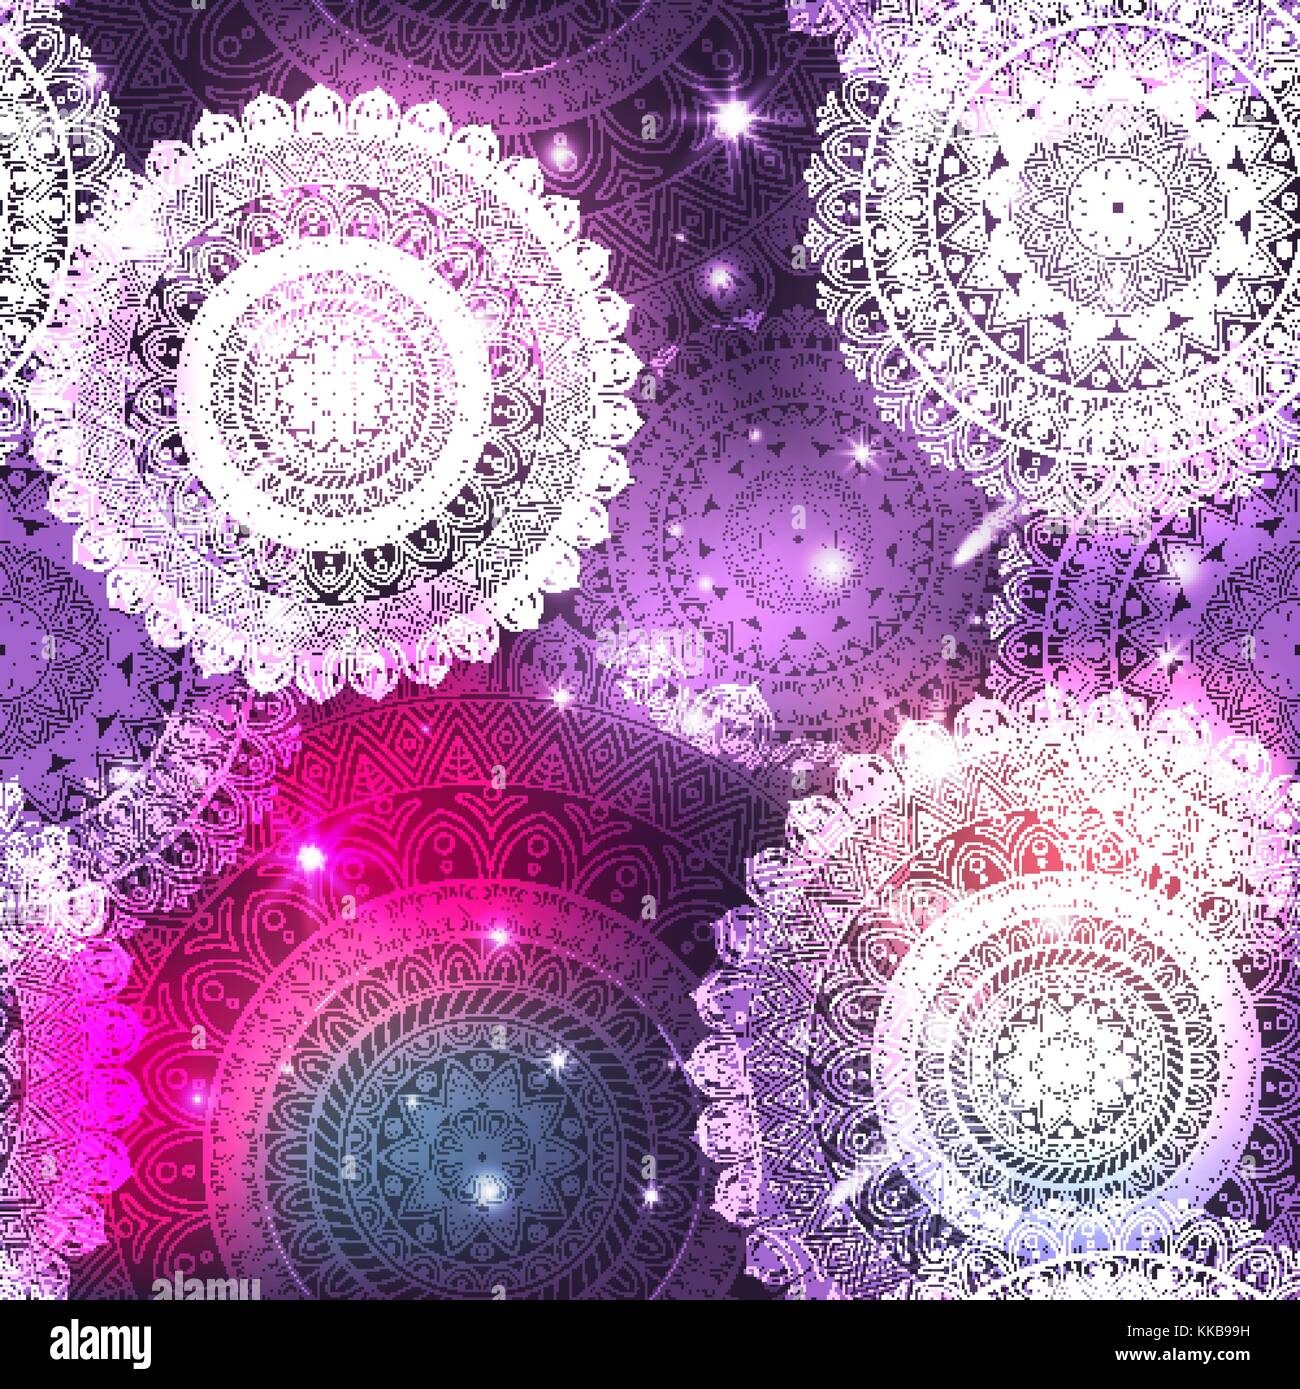 Ornate floral seamless texture, endless pattern with glowing bright mandala elements. Stock Vector